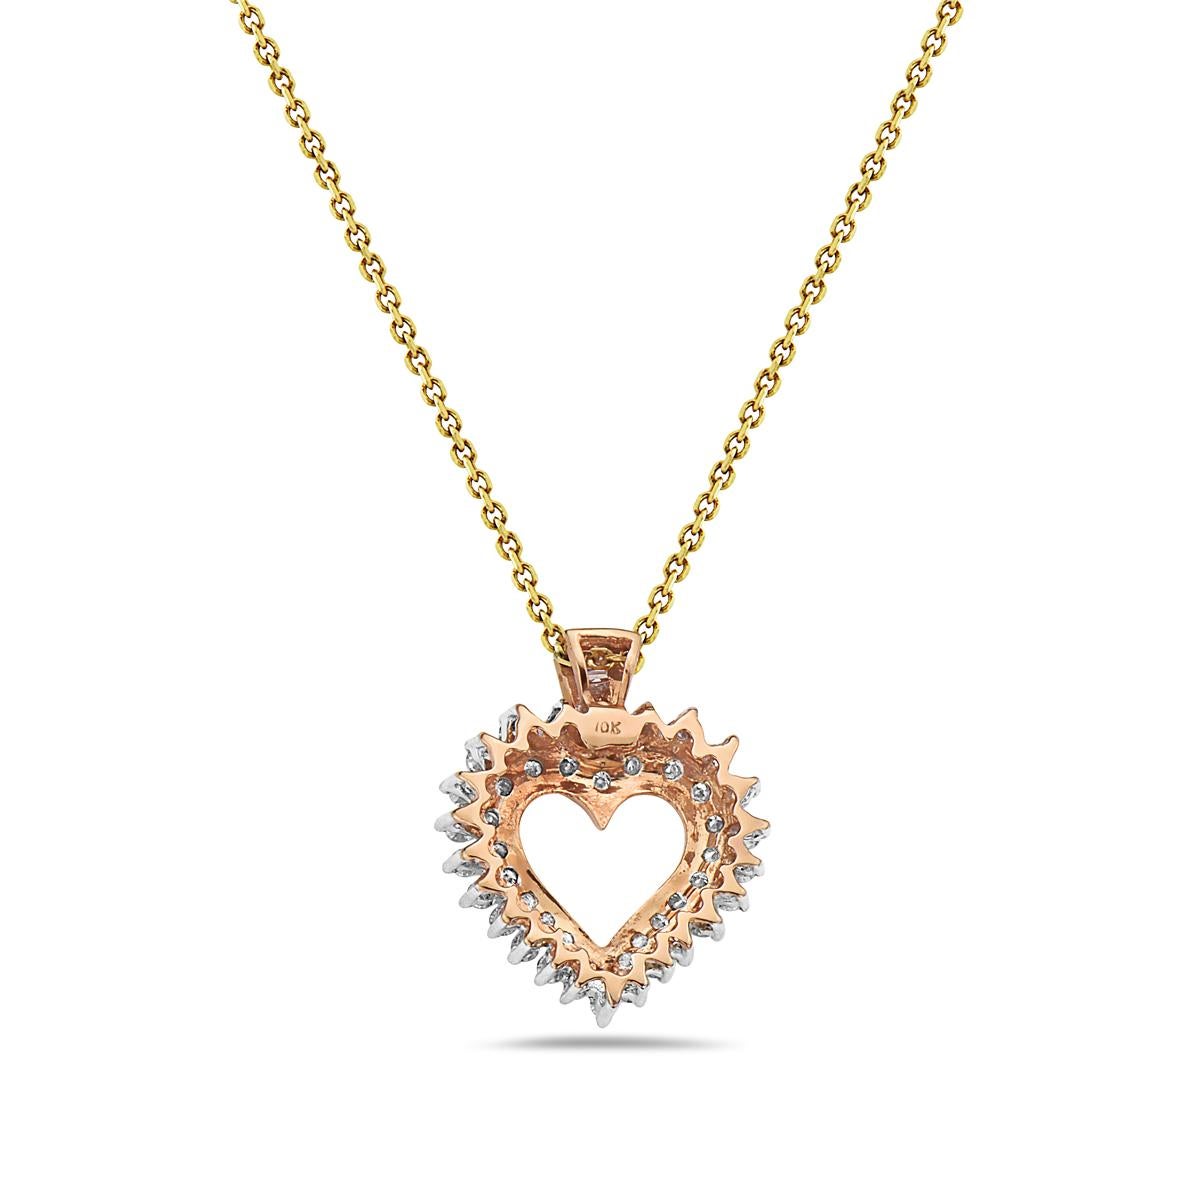 This pendant necklace features 0.95 carats of round diamonds and 0.05 carats of baguette diamonds. 16 inch chain included. Chain included may vary from chain shown in the photo. 


Viewings available in our NYC showroom by appointment.